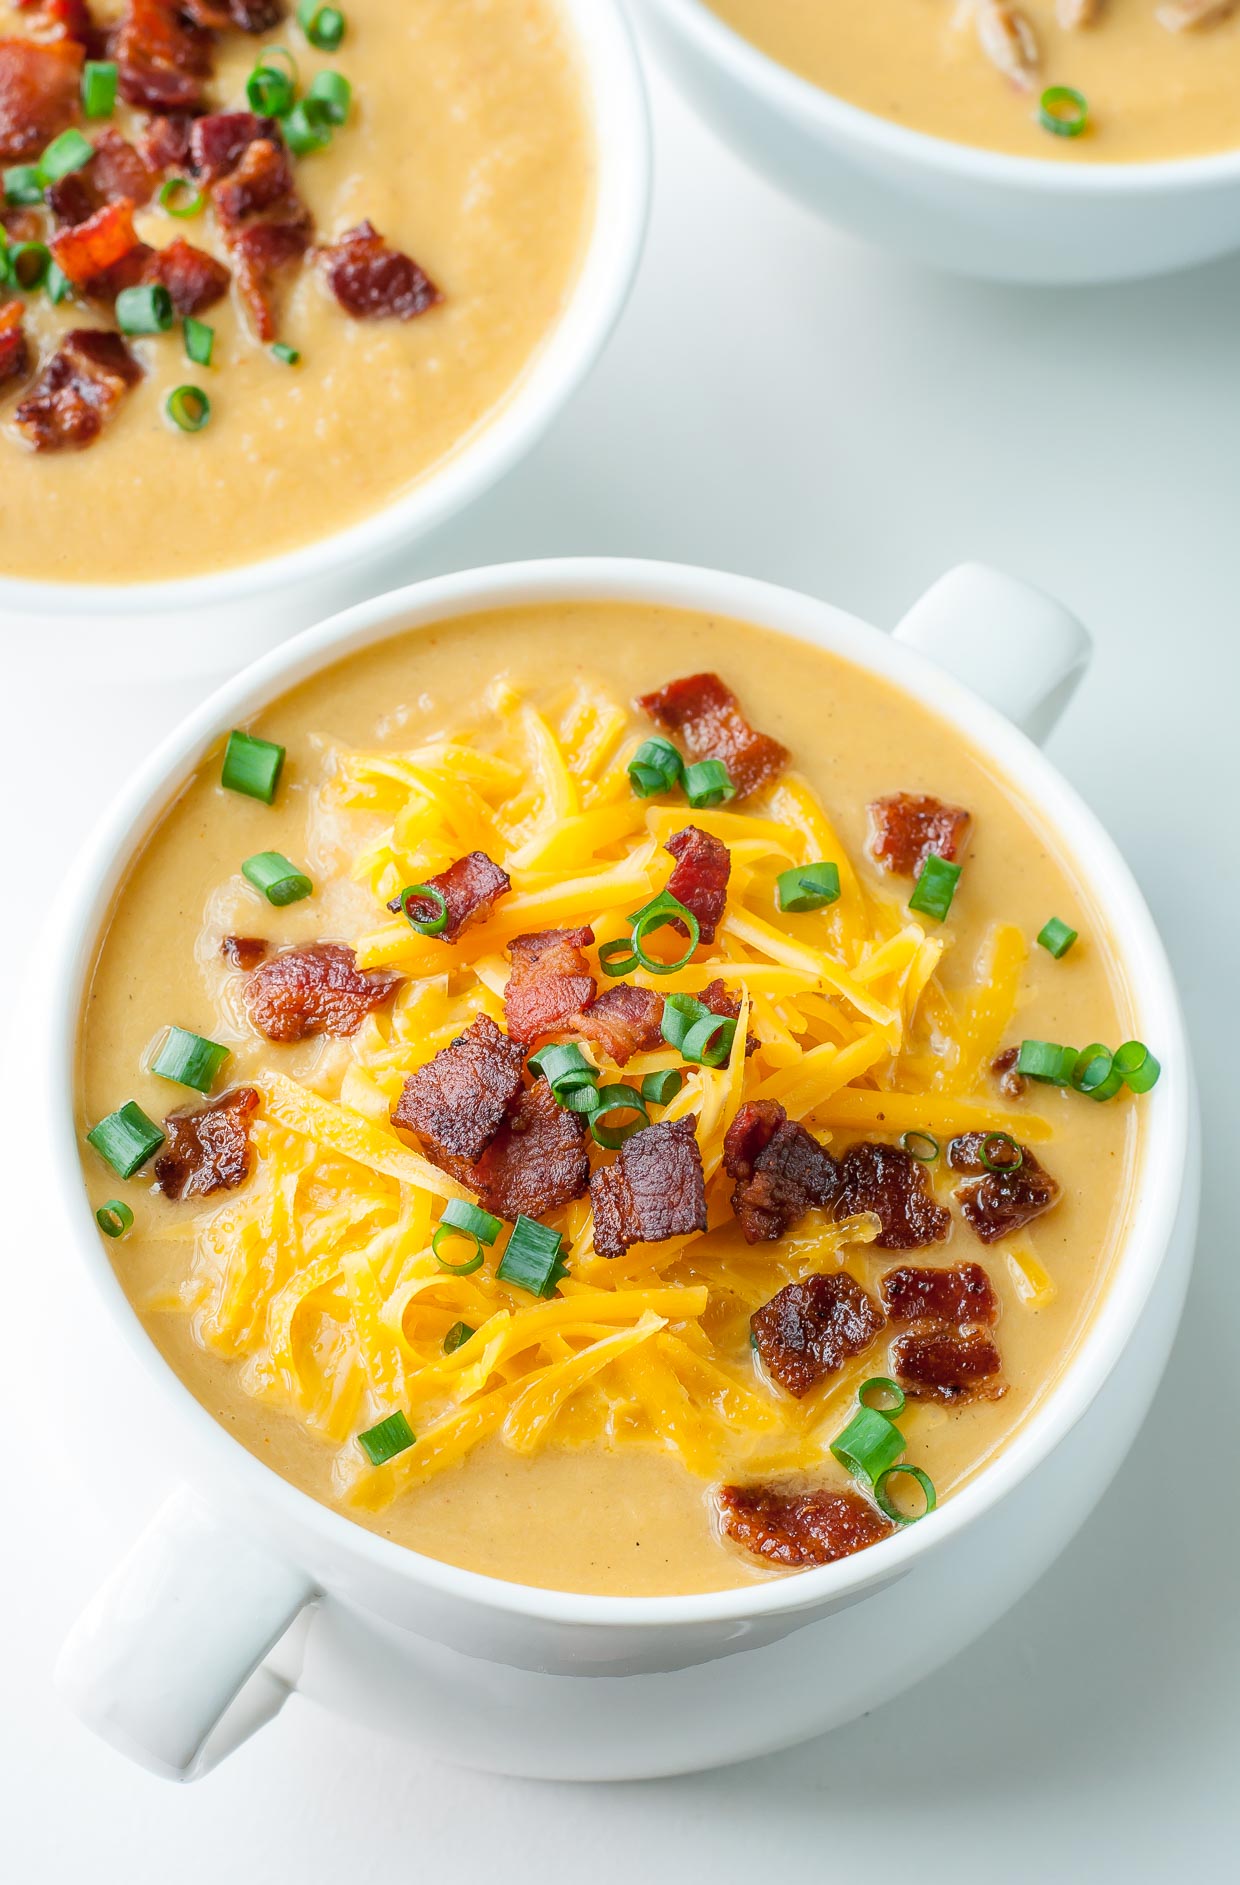 Grab your Crock Pot or Instant Pot and throw together this tasty soup in record time. With minimal prep and tons of flavor, this Butternut Cauliflower Soup is sure to be a new Fall favorite!